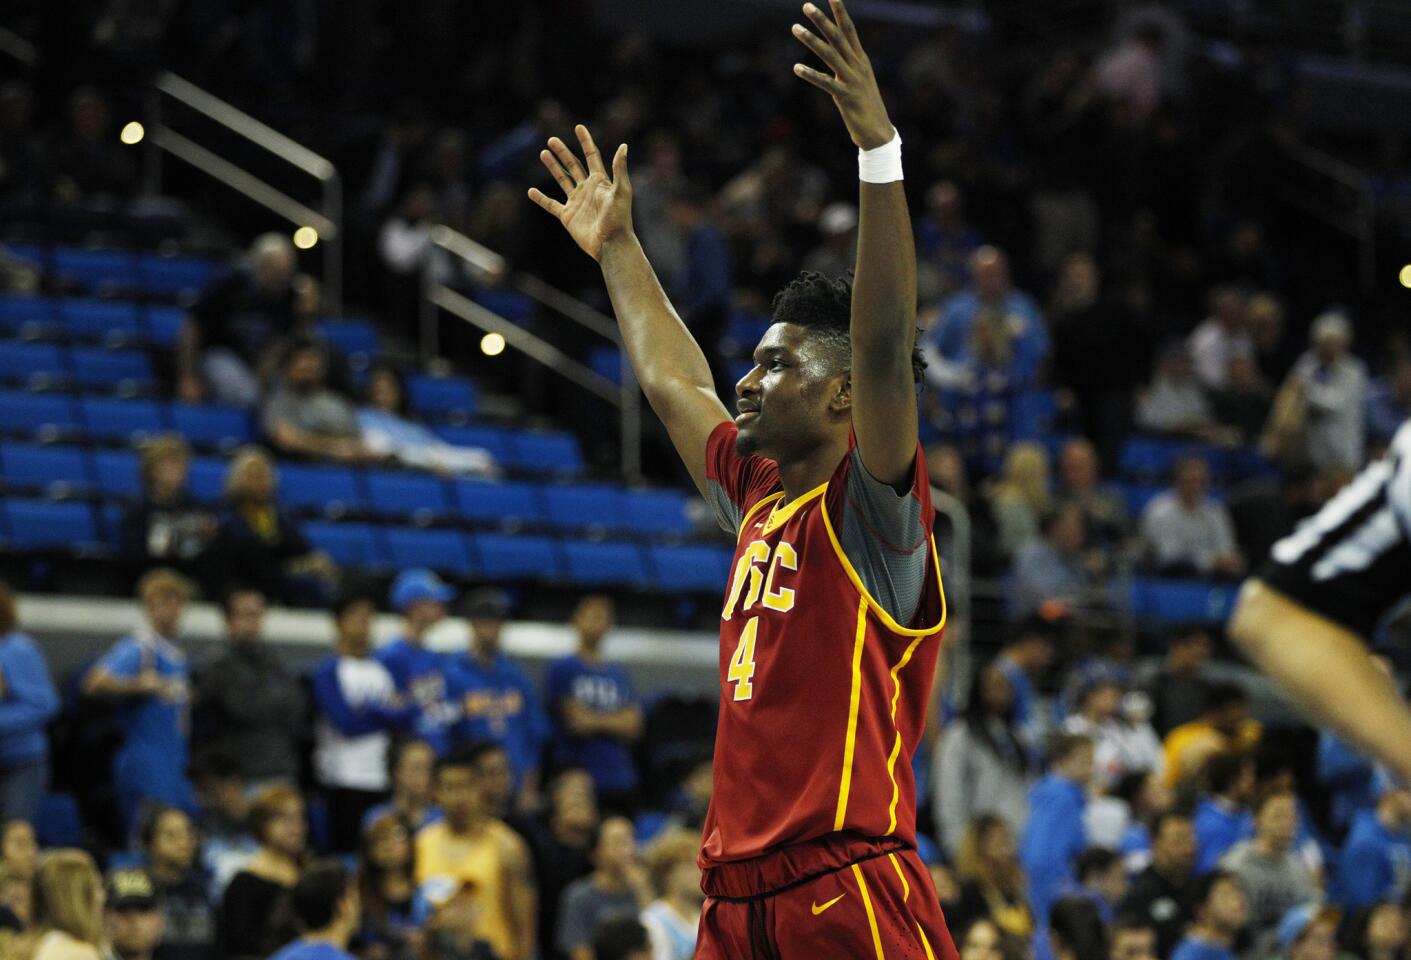 USC forward Chimezie Metu (4) celebrates after an 89-75 victory over UCLA on Wednesday night at Pauley Pavilion.